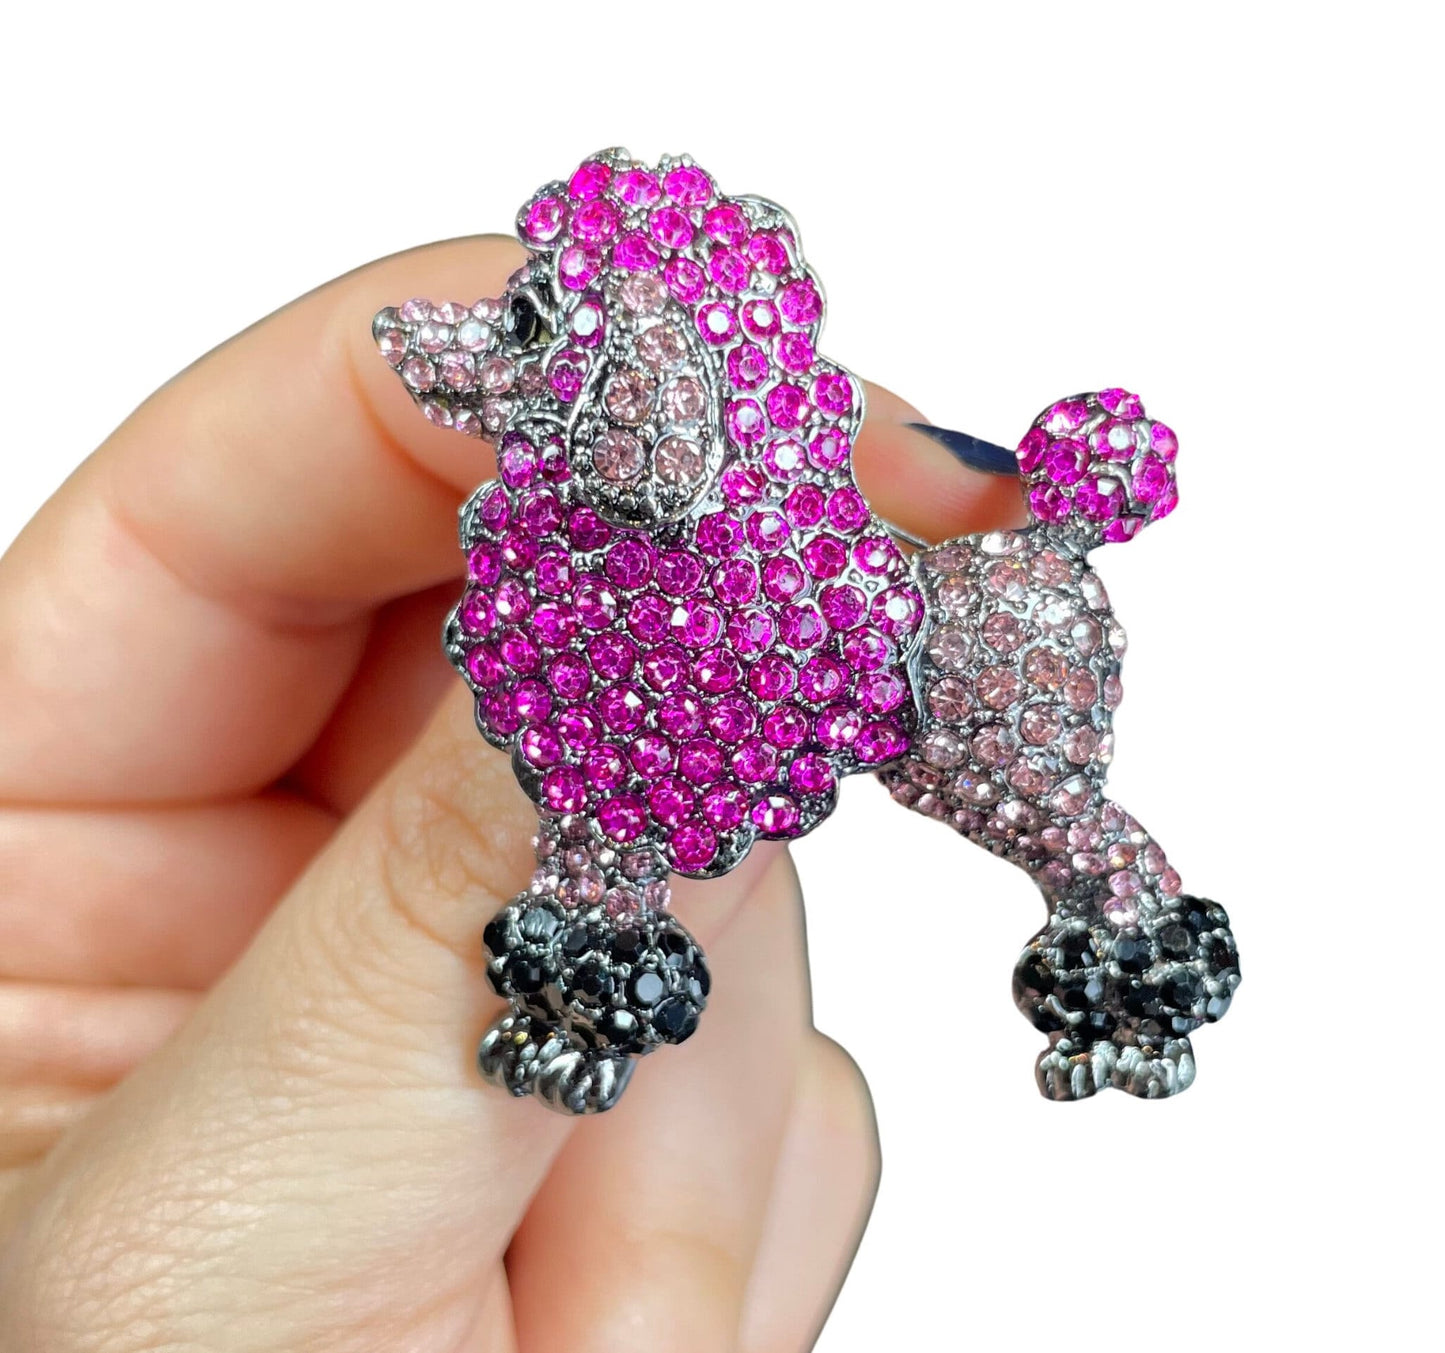 Cute Pink Poodle Dog Pin Brooch